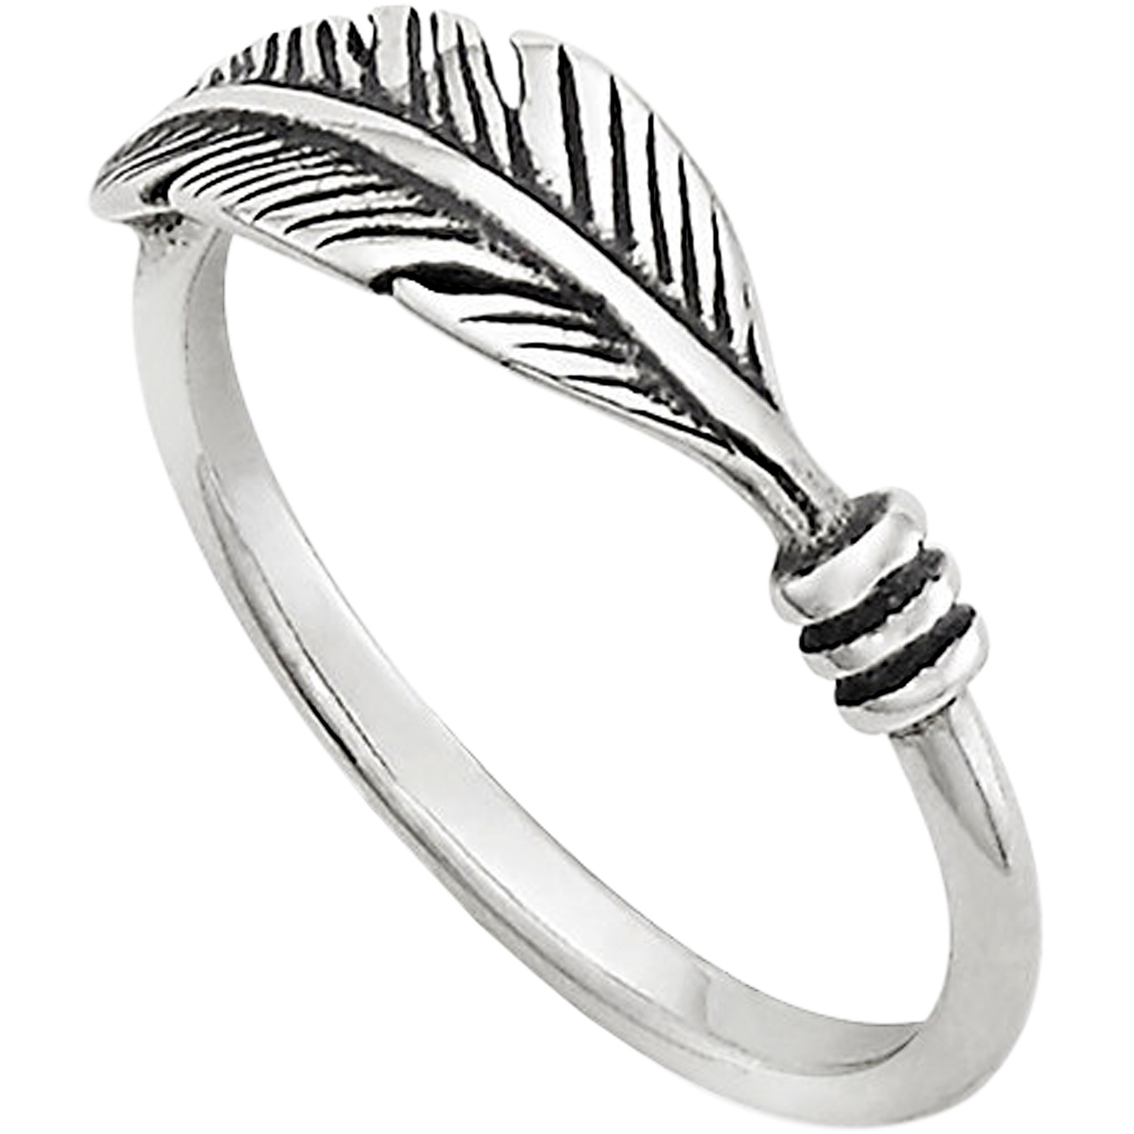 James Avery Delicate Feather Ring - Image 2 of 2